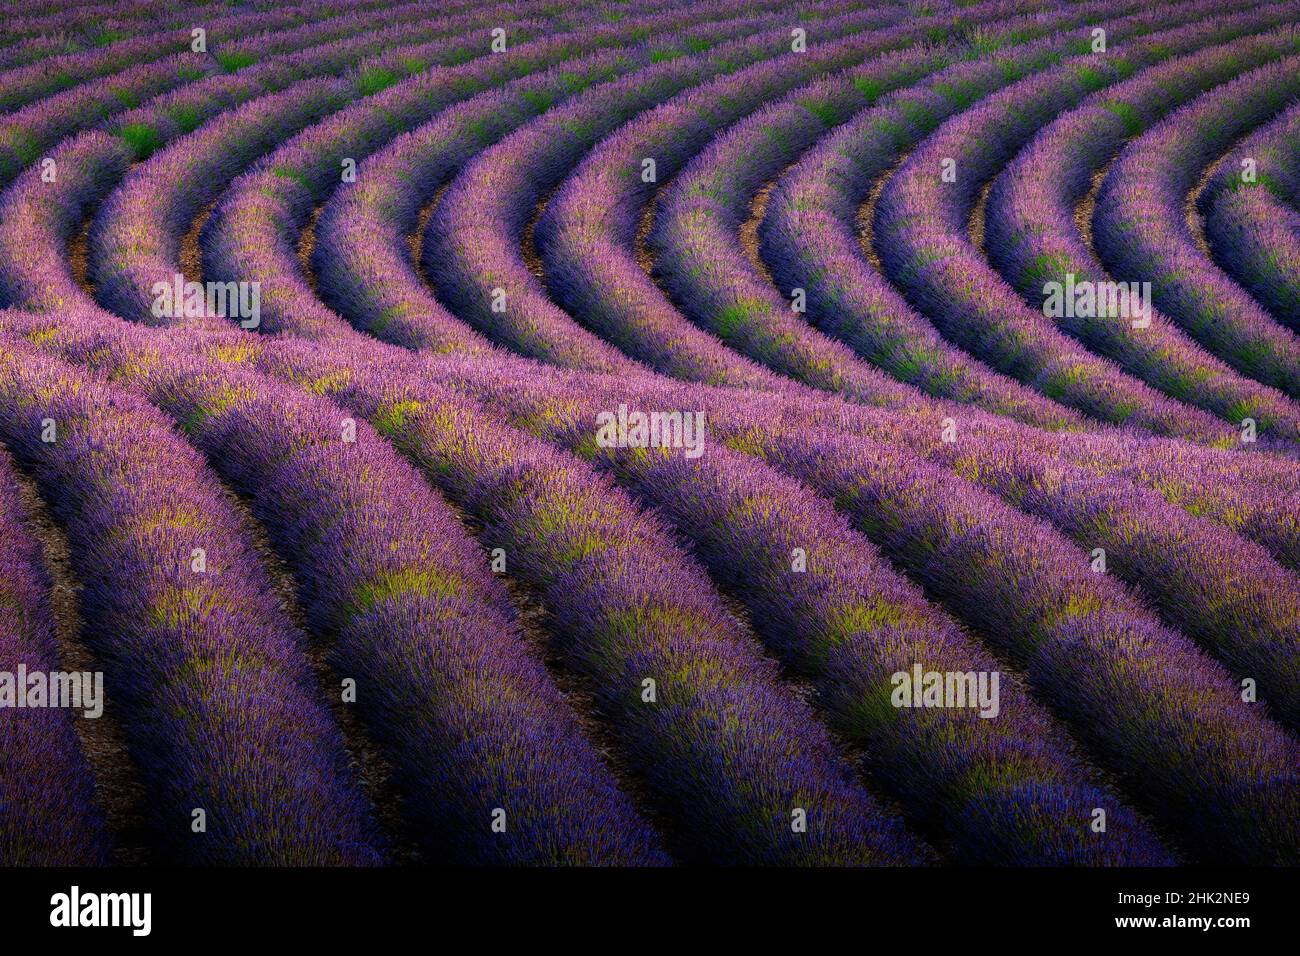 Europe, France, Provence, Valensole Plateau. Rows of ripe lavender. Stock Photo